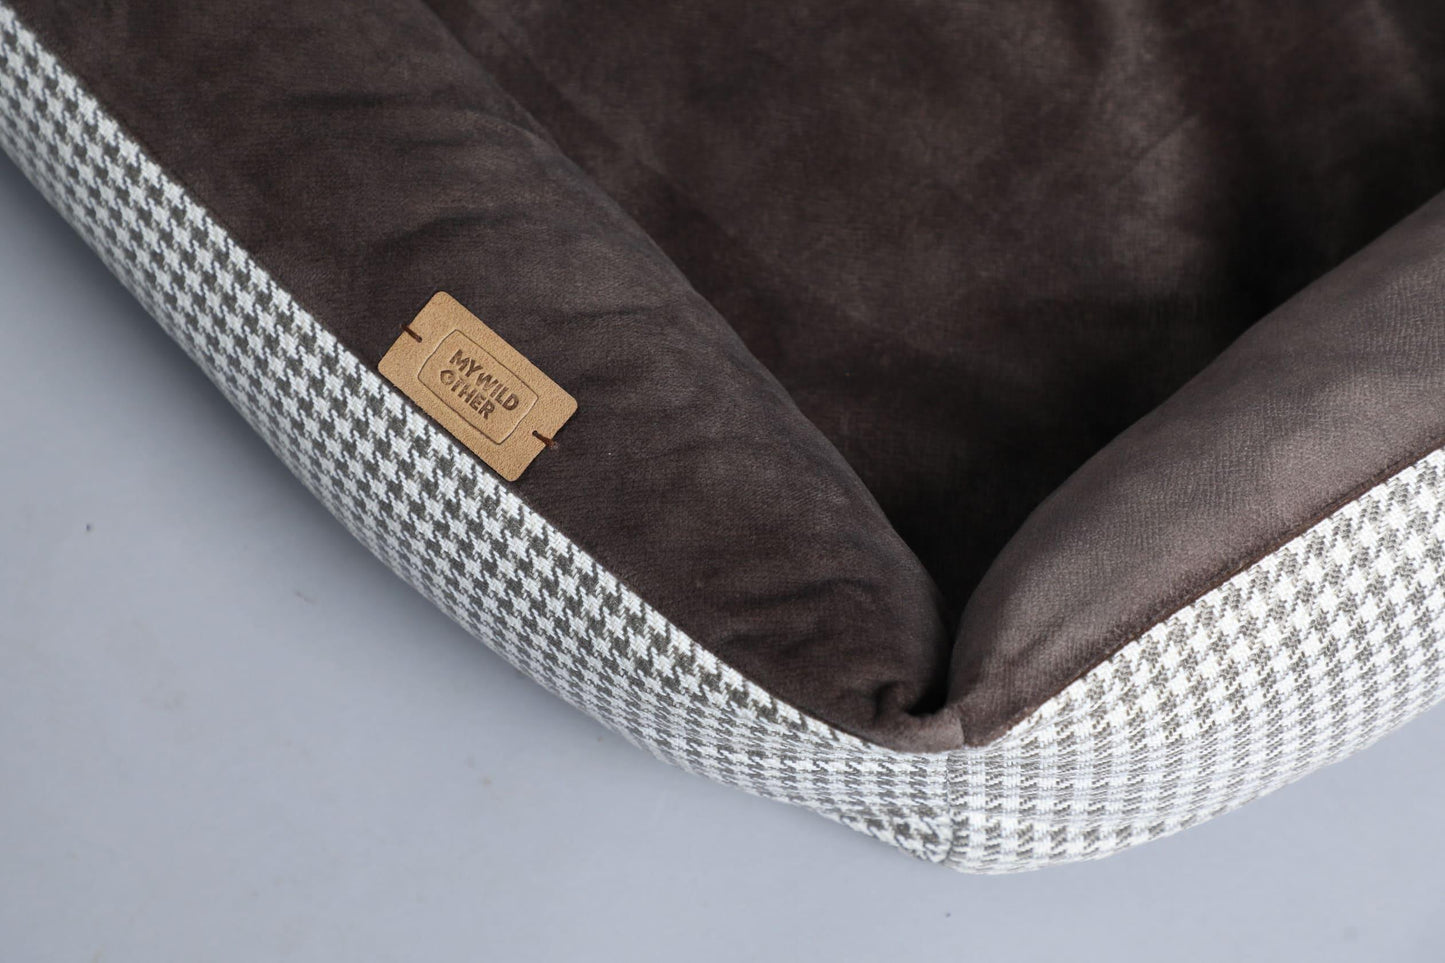 Modern dog bed with sides | 2-sided | HOUNDSTOOTH+TAUPE - premium dog goods handmade in Europe by My Wild Other